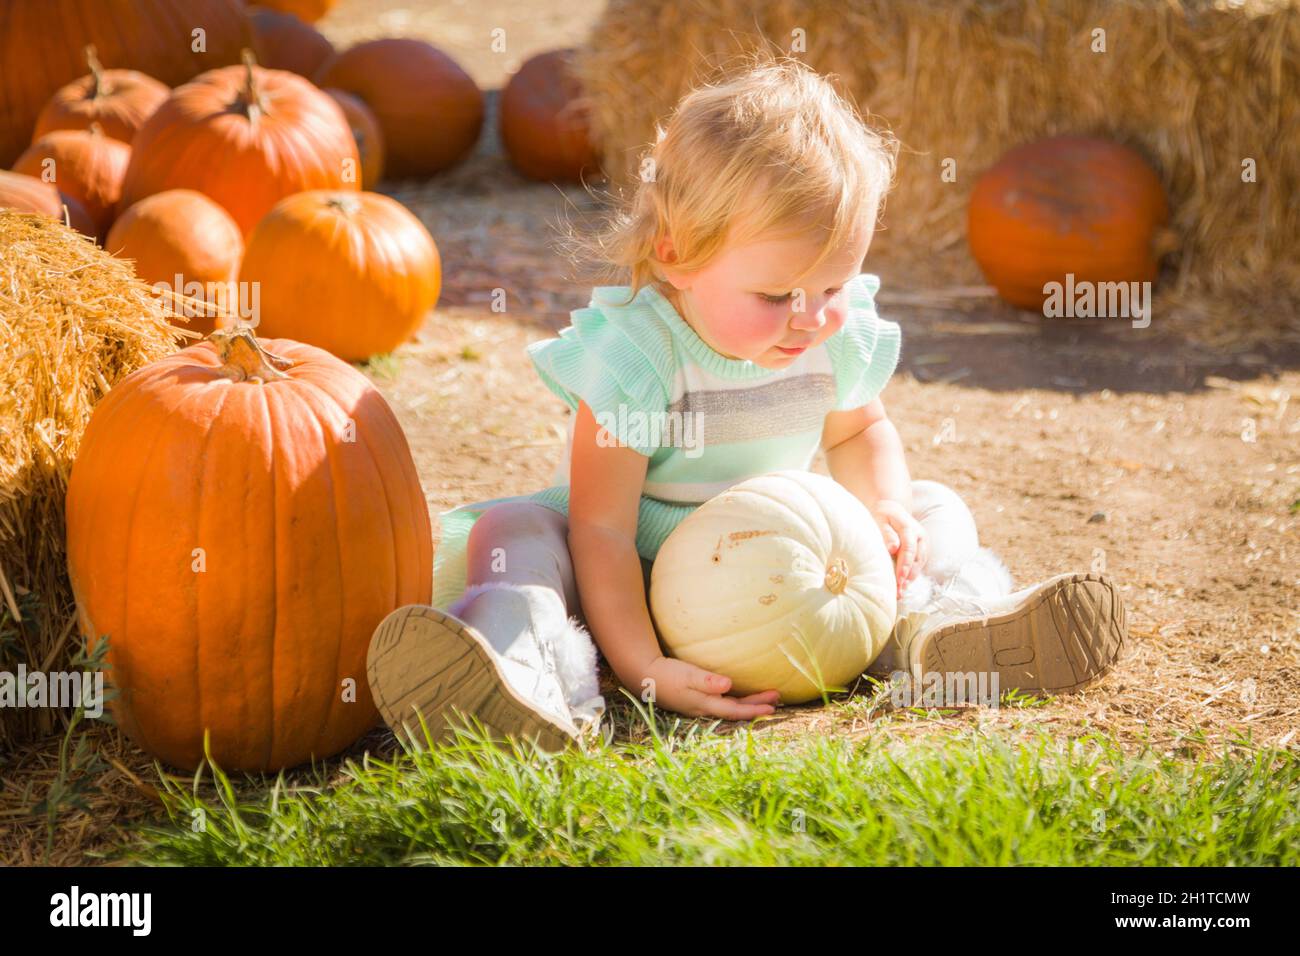 Adorable Baby Girl with Cowboy Hat in a Country Rustic Setting at the  Pumpkin Patch Stock Photo - Alamy